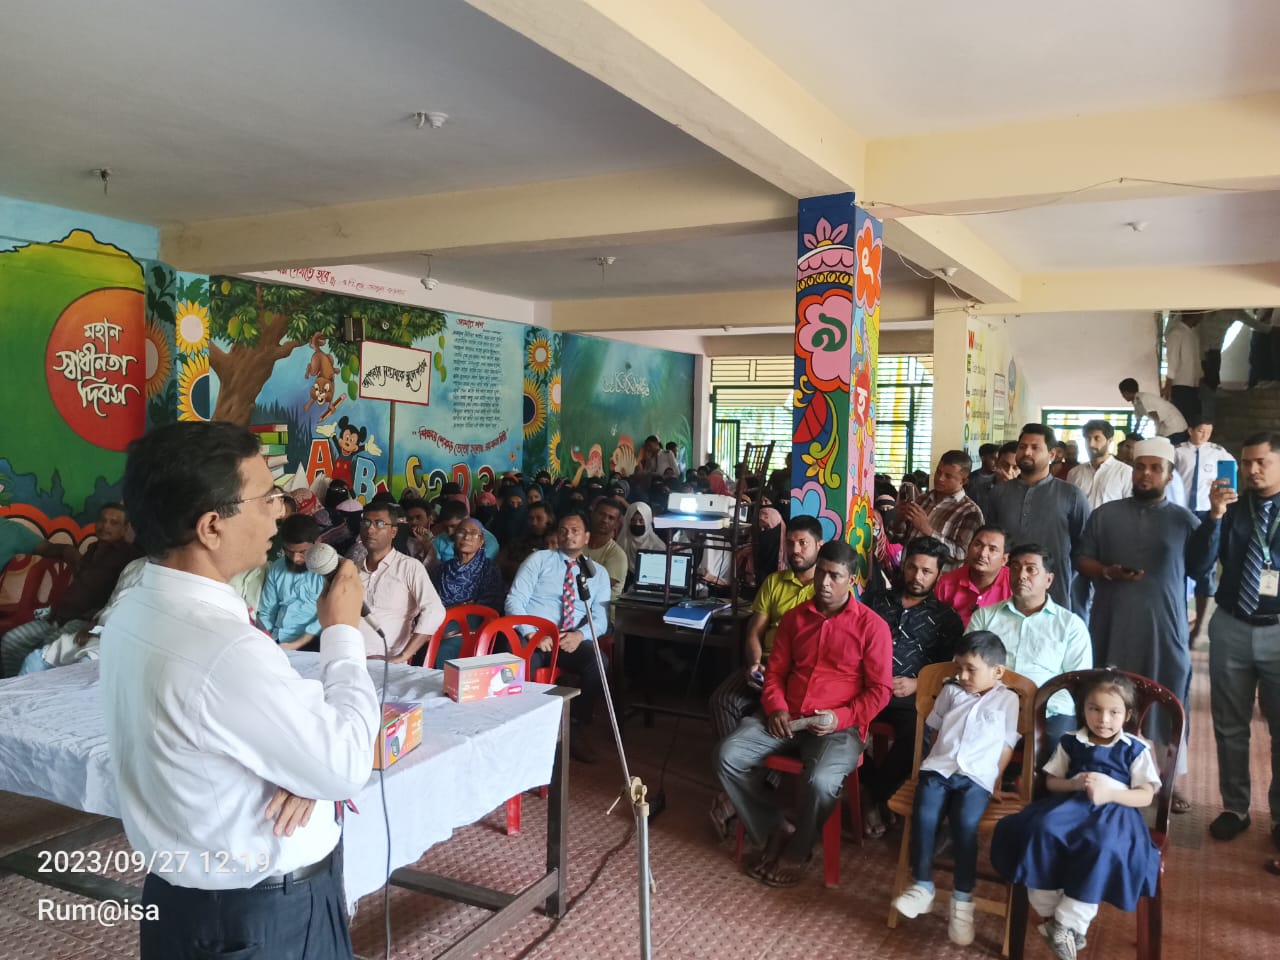 For collecting all student fees through FirstCash, an exchange meeting was held with the students and parents of S.A. Chowdhury Institute, Kumira, Chittagong School. 